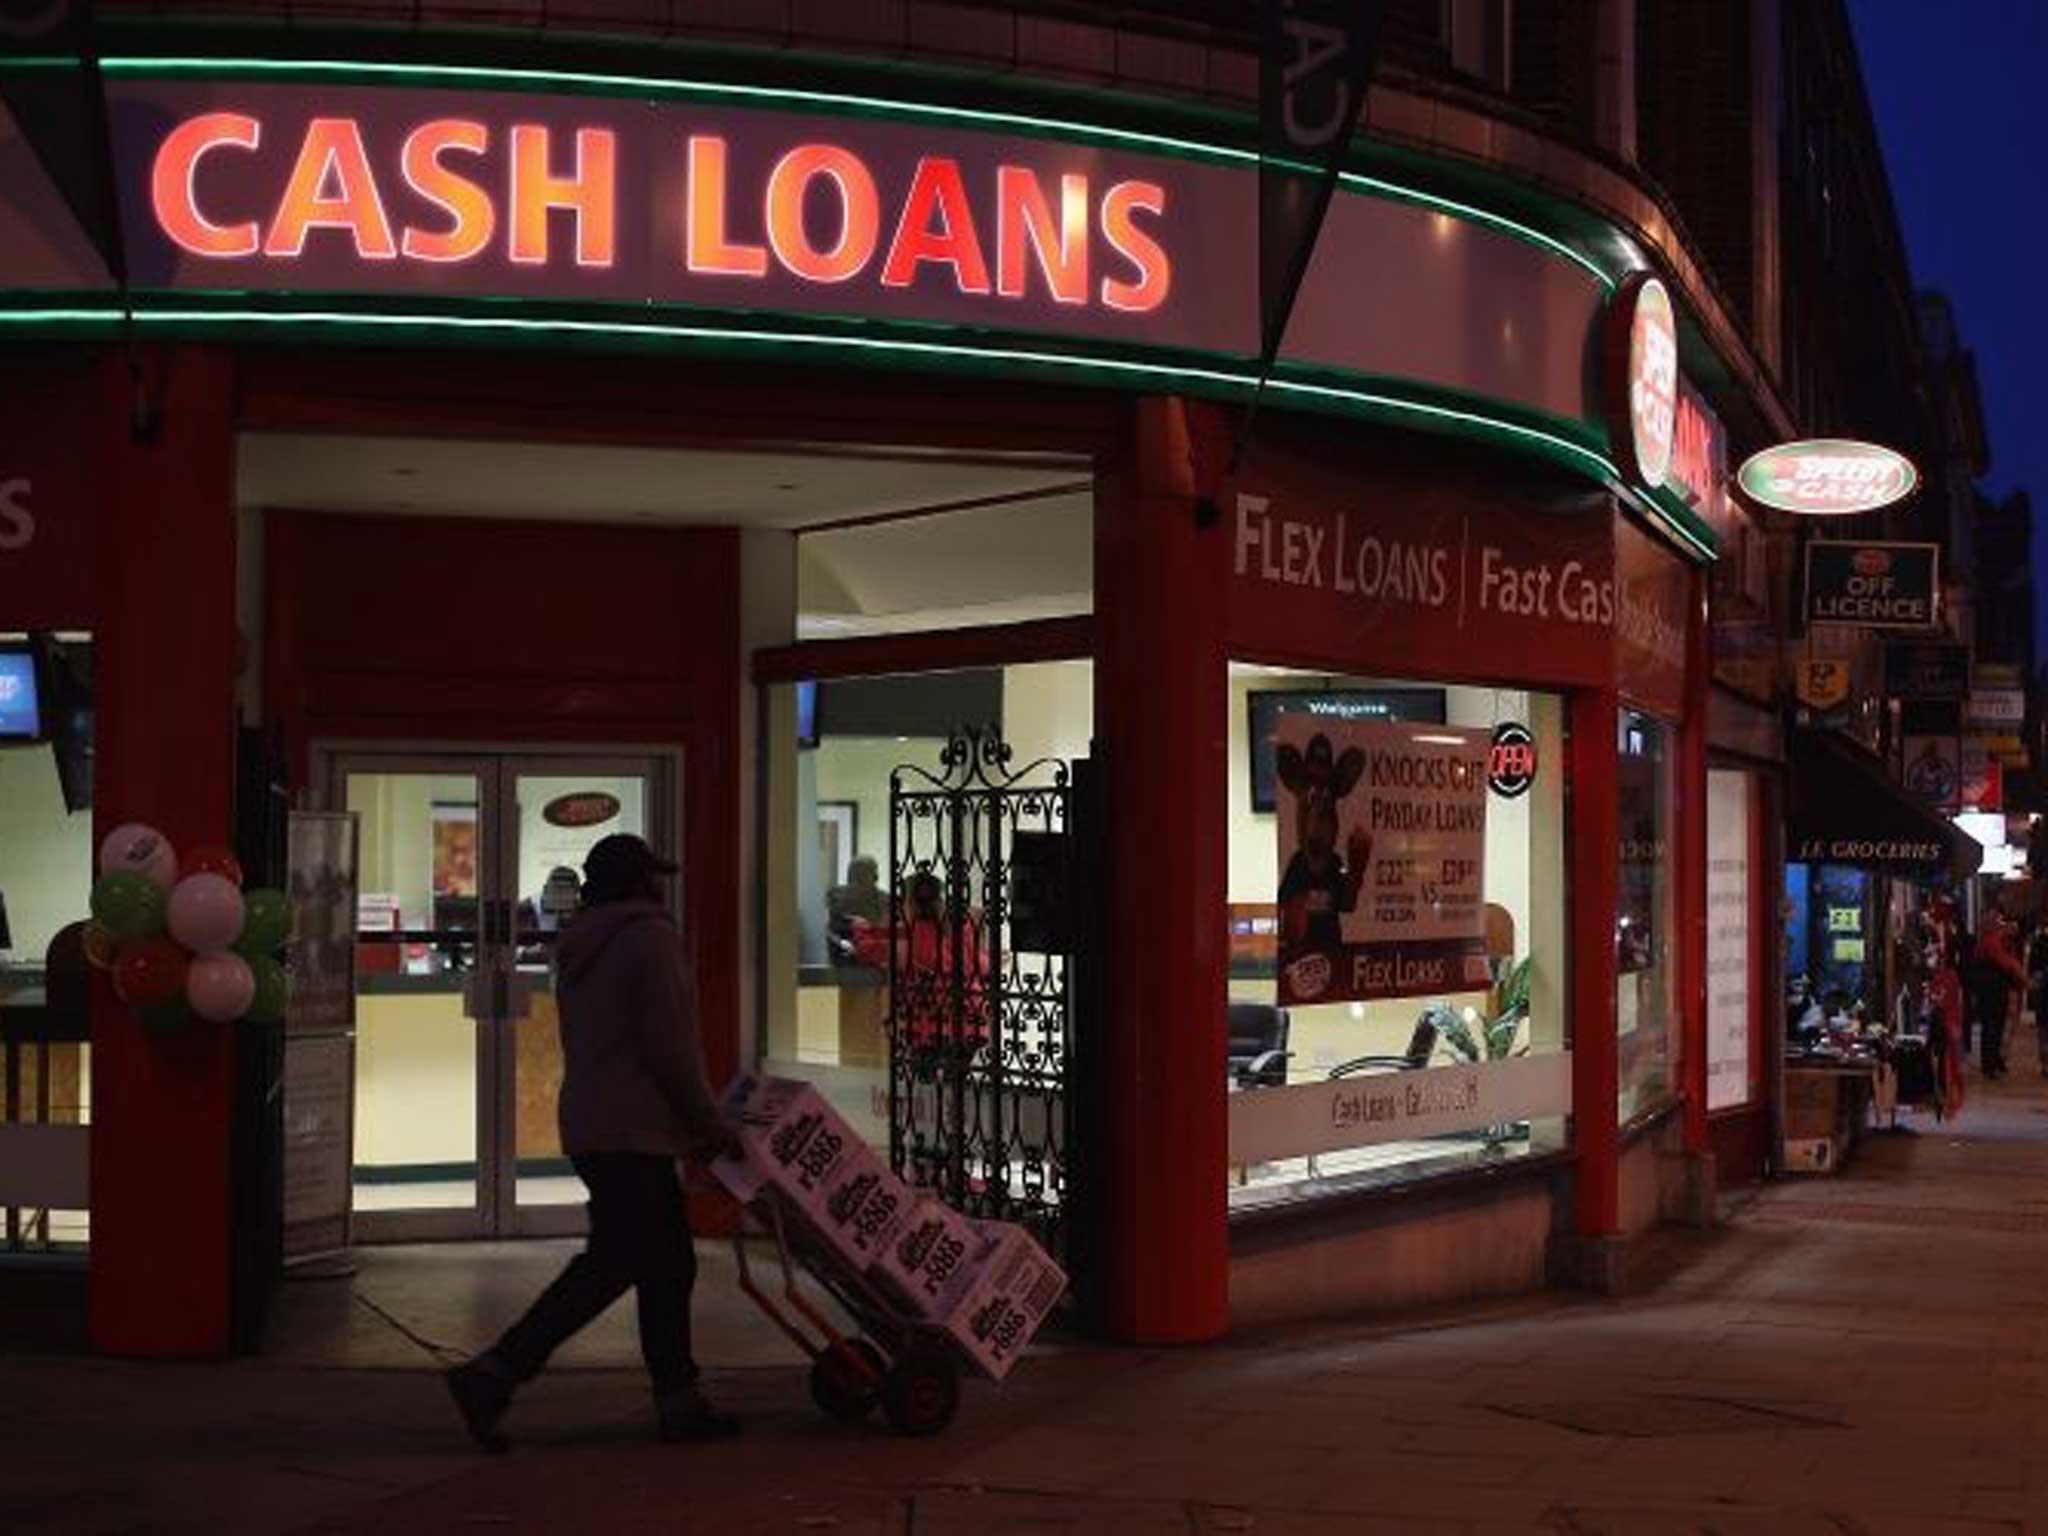 A million households take out payday loans every month